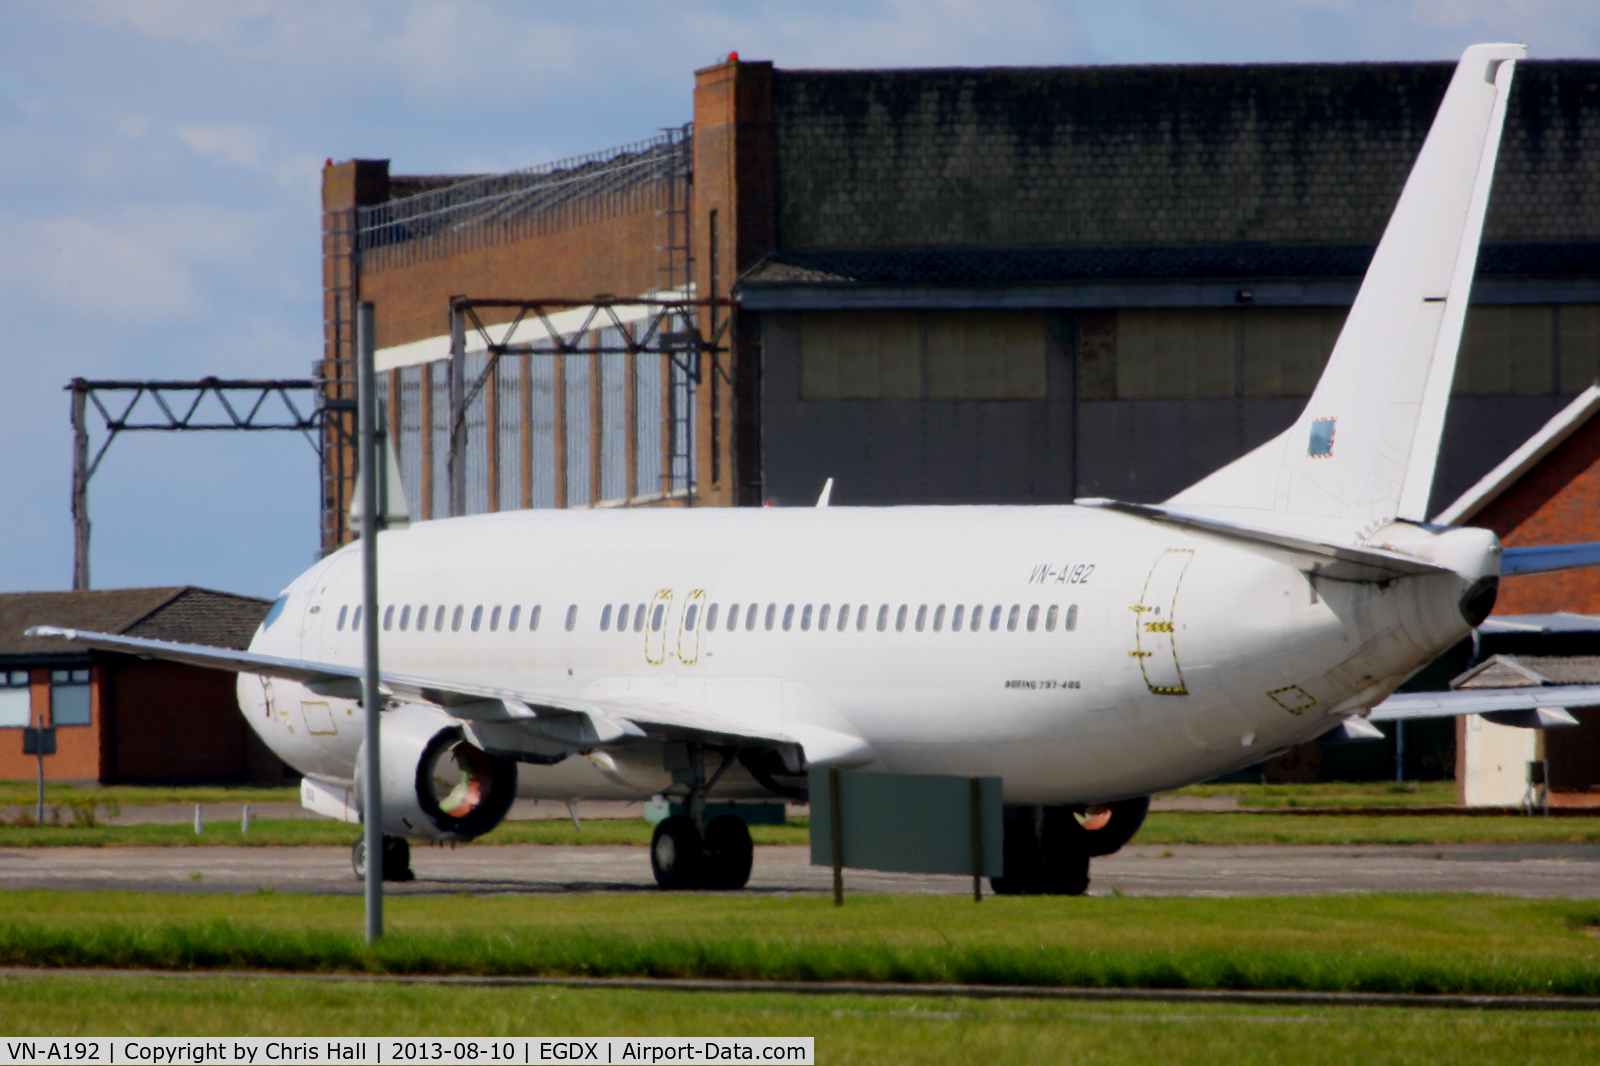 VN-A192, 1993 Boeing 737-4Q8 C/N 26289, ex Jetstar Pacific Airlines in storage at St Athan